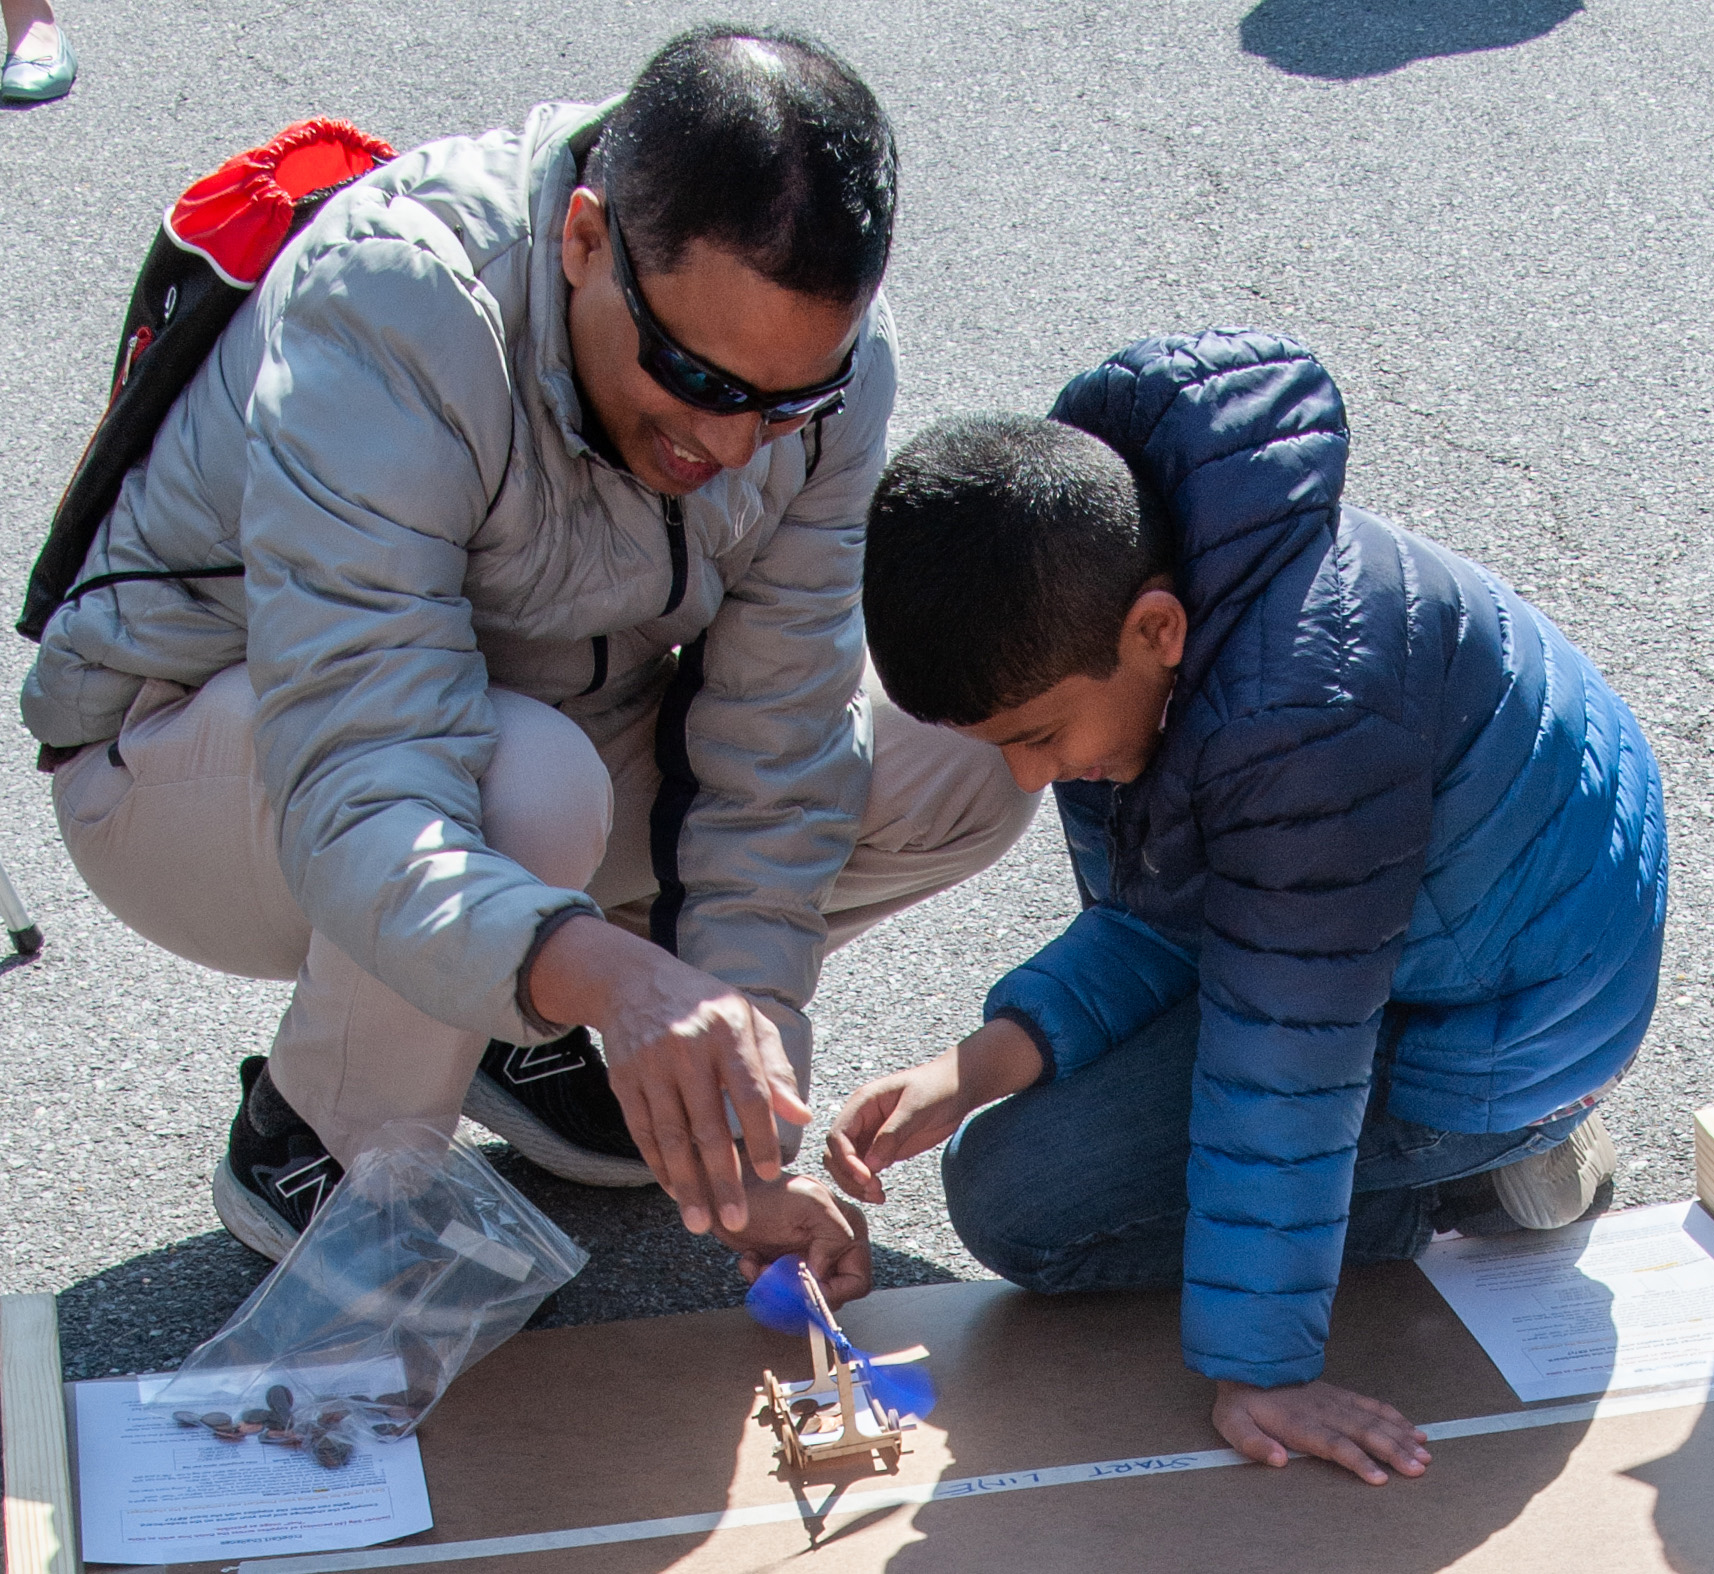 Praveen Konnuru and his child, Shriyans, experiment with GOALKits at Maryland Day in April 2022.